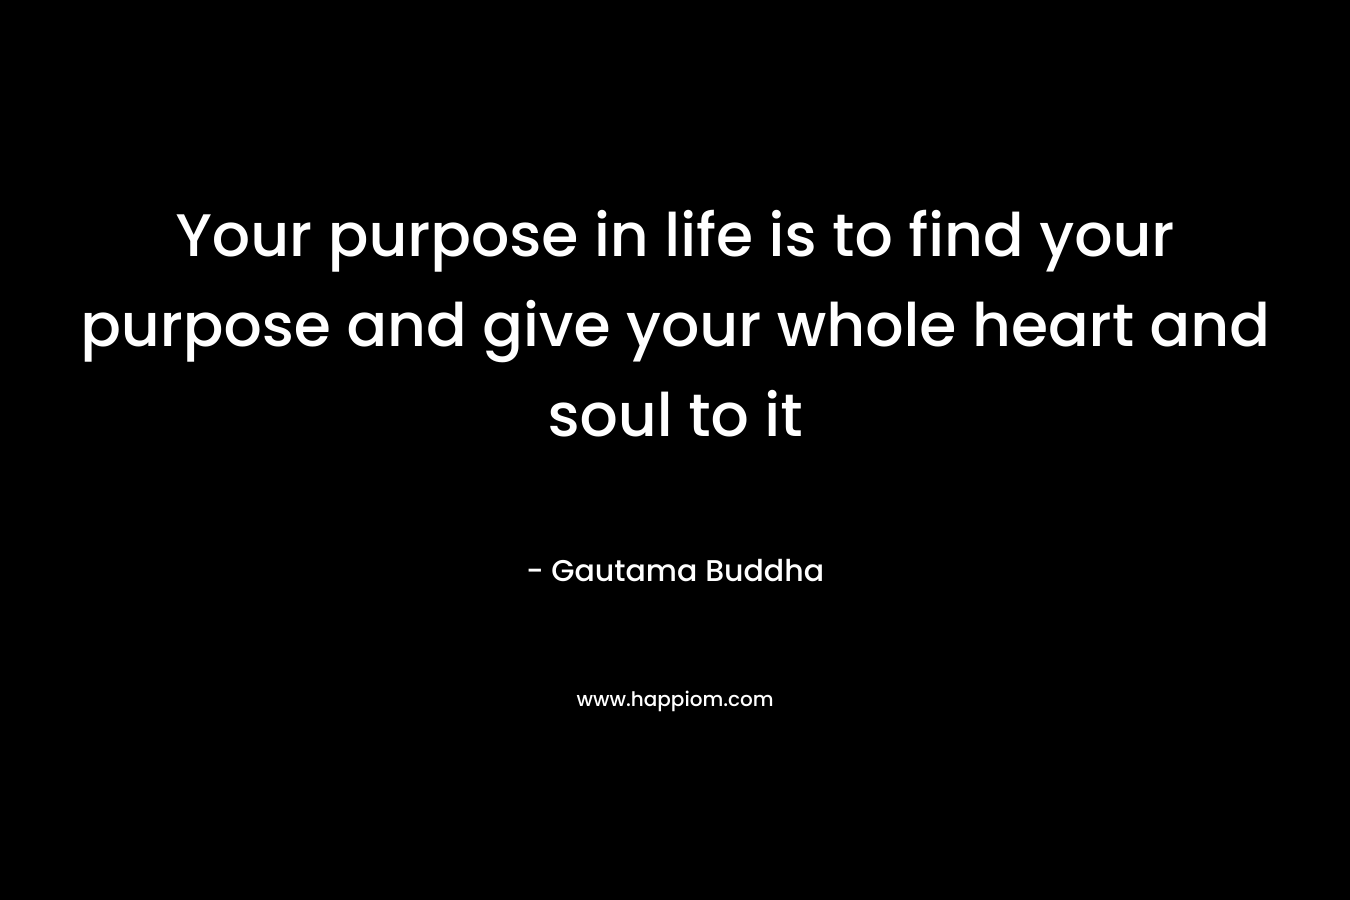 Your purpose in life is to find your purpose and give your whole heart and soul to it